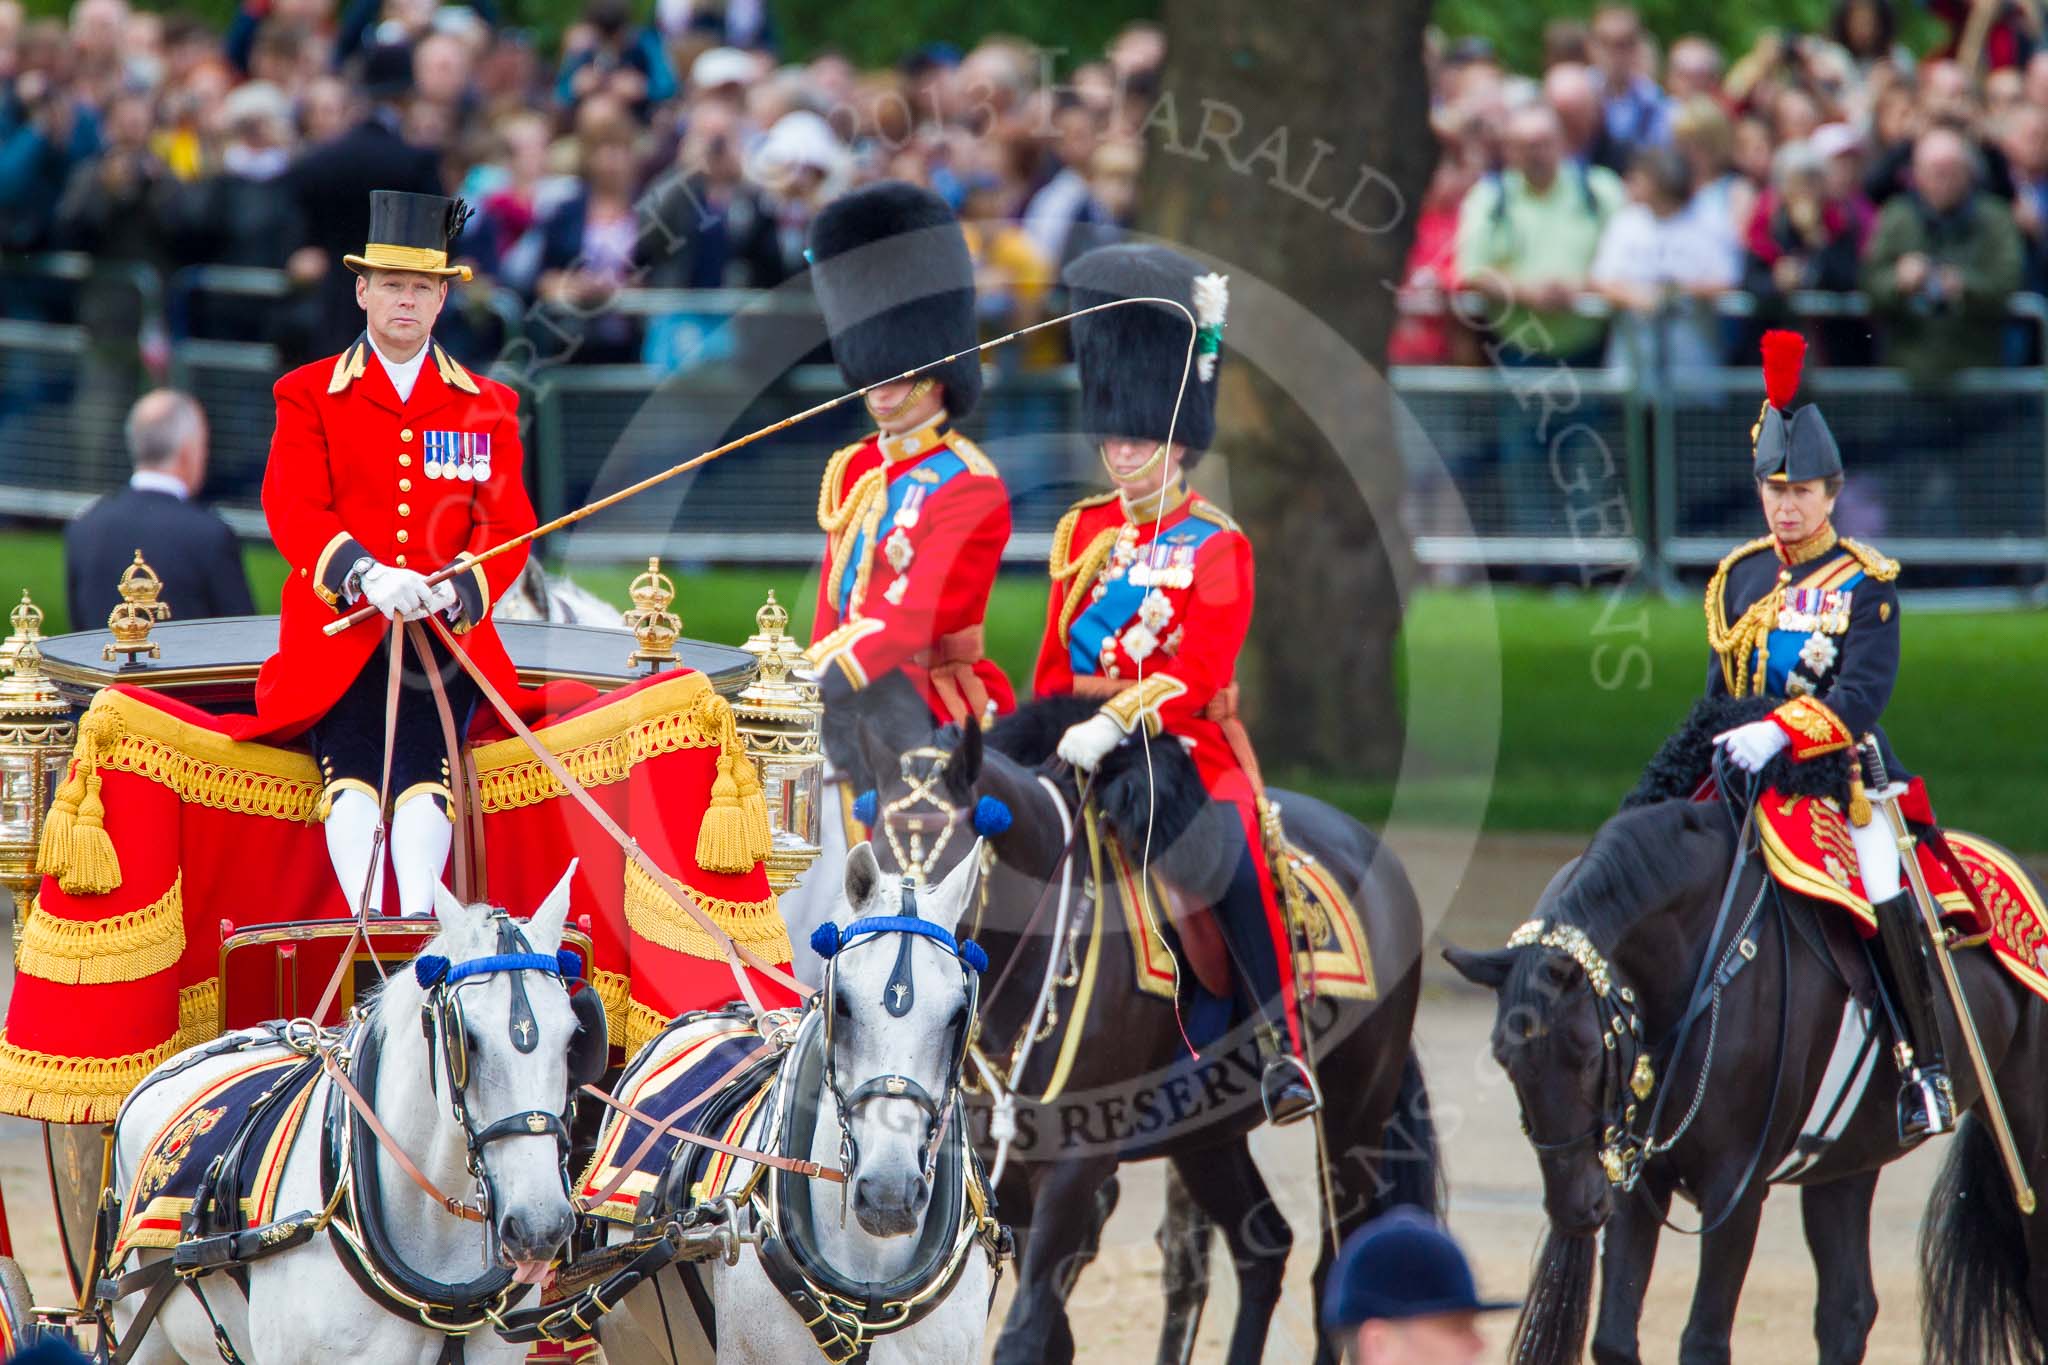 Trooping the Colour 2013: After the Inspection of the Line, the Glass Coach with HM The Queen turns back toward the dais for Her Majesty. Behind the Glass Coach the three Royal Colonels, HRH The Duke of Cambridge, Colonel Irish Guards, HRH The Prince of Wales, Colonel Welsh Guards, and HRH The Princess Royal, Colonel The Blues and Royals (Royal Horse Guards and 1st Dragoons)..
Horse Guards Parade, Westminster,
London SW1,

United Kingdom,
on 15 June 2013 at 11:06, image #356